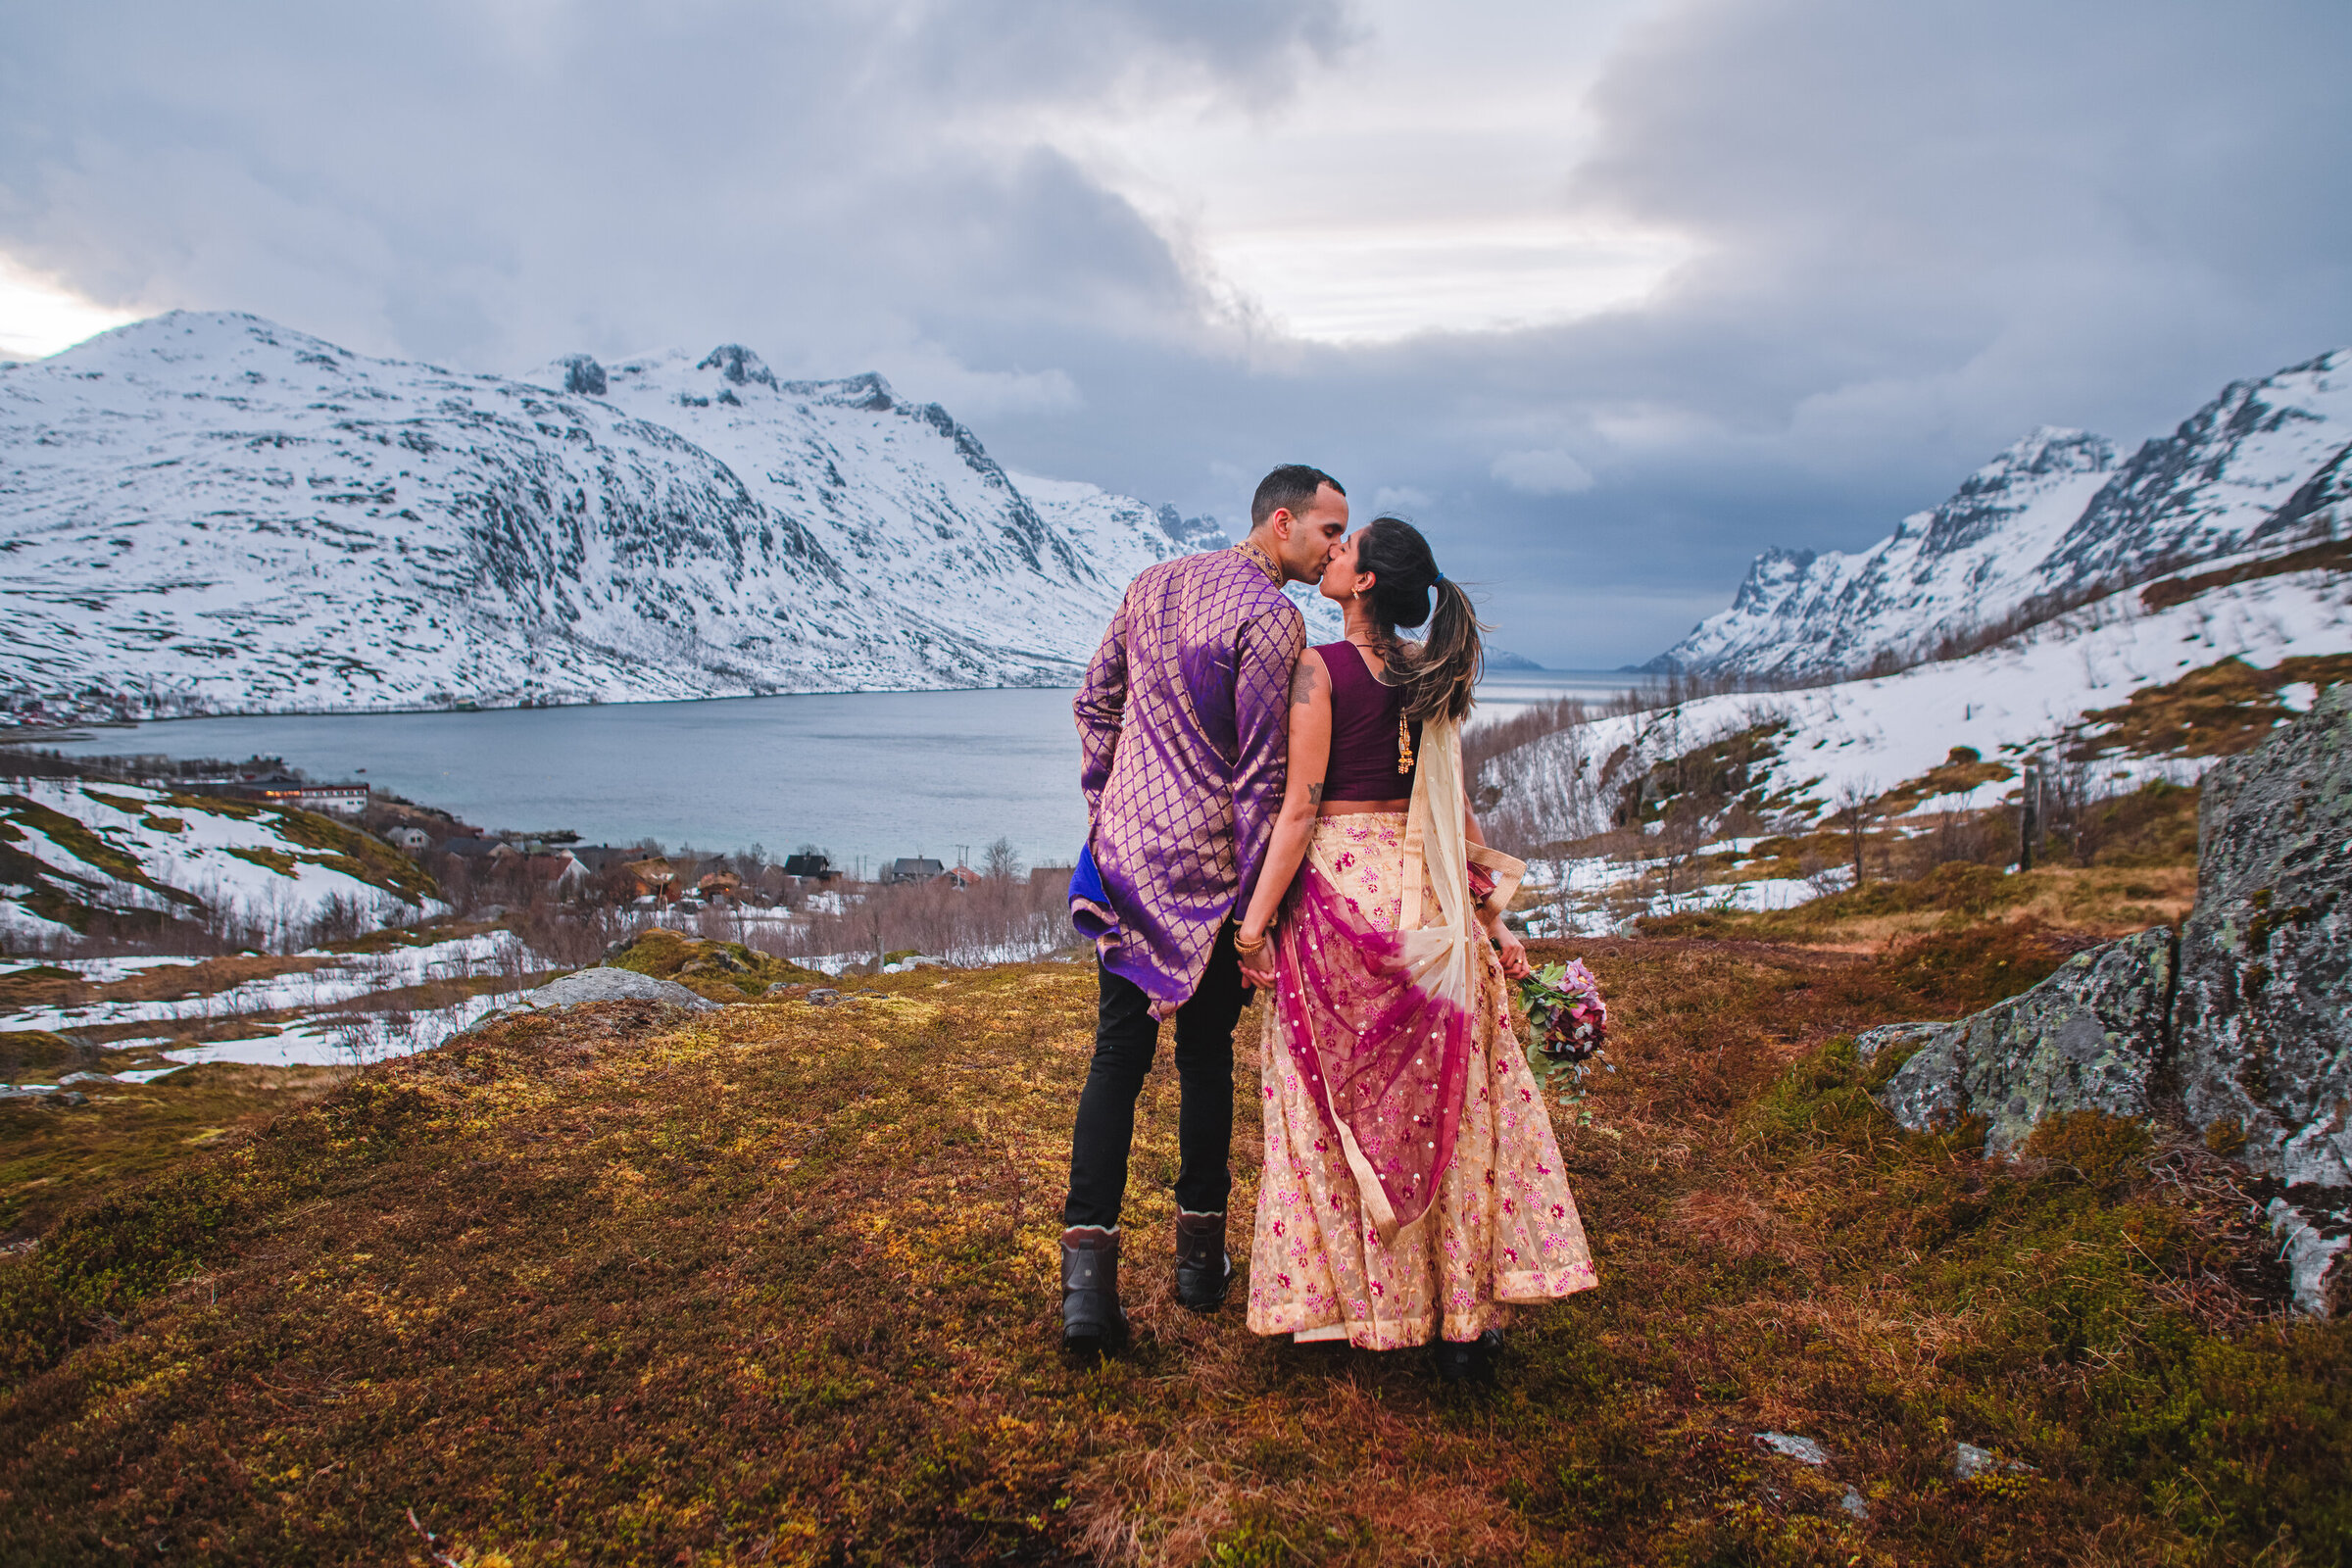 A couple in traditional Indian attire shares an  intimate kiss during their elopement, on a fjord overlook in Tromsø, Norway. They stand on a moss-covered mountainside, amidst a majestic, snow-capped mountain landscape. The man, dressed in a purple kurta with golden designs, gently kisses the woman, who is turned towards him wearing an ornate burgundy, pink and gold lehenga, with her back to the camera, both complementing the wild beauty of the Norwegian landscape. The sky above is filled with the dramatic February snow clouds and the soft glow of afternoon light, adding a touch of magic to the scene.